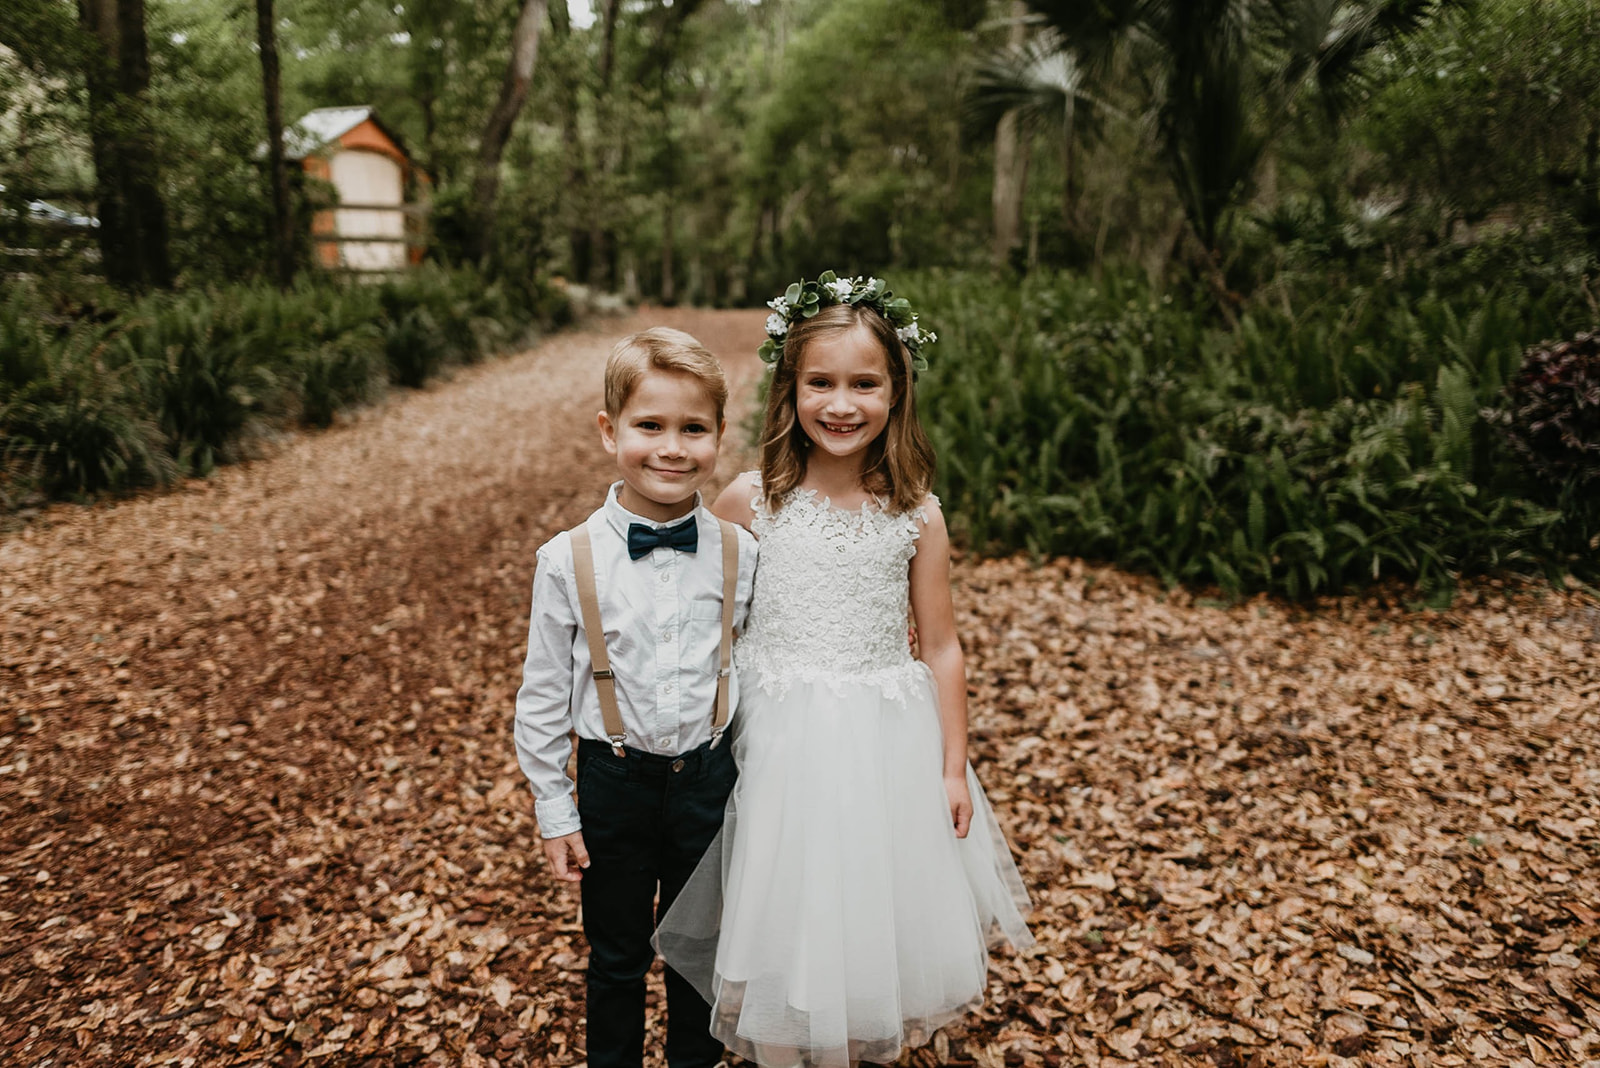 Rustic Flower Girl and Ring Bearer Wedding Photography